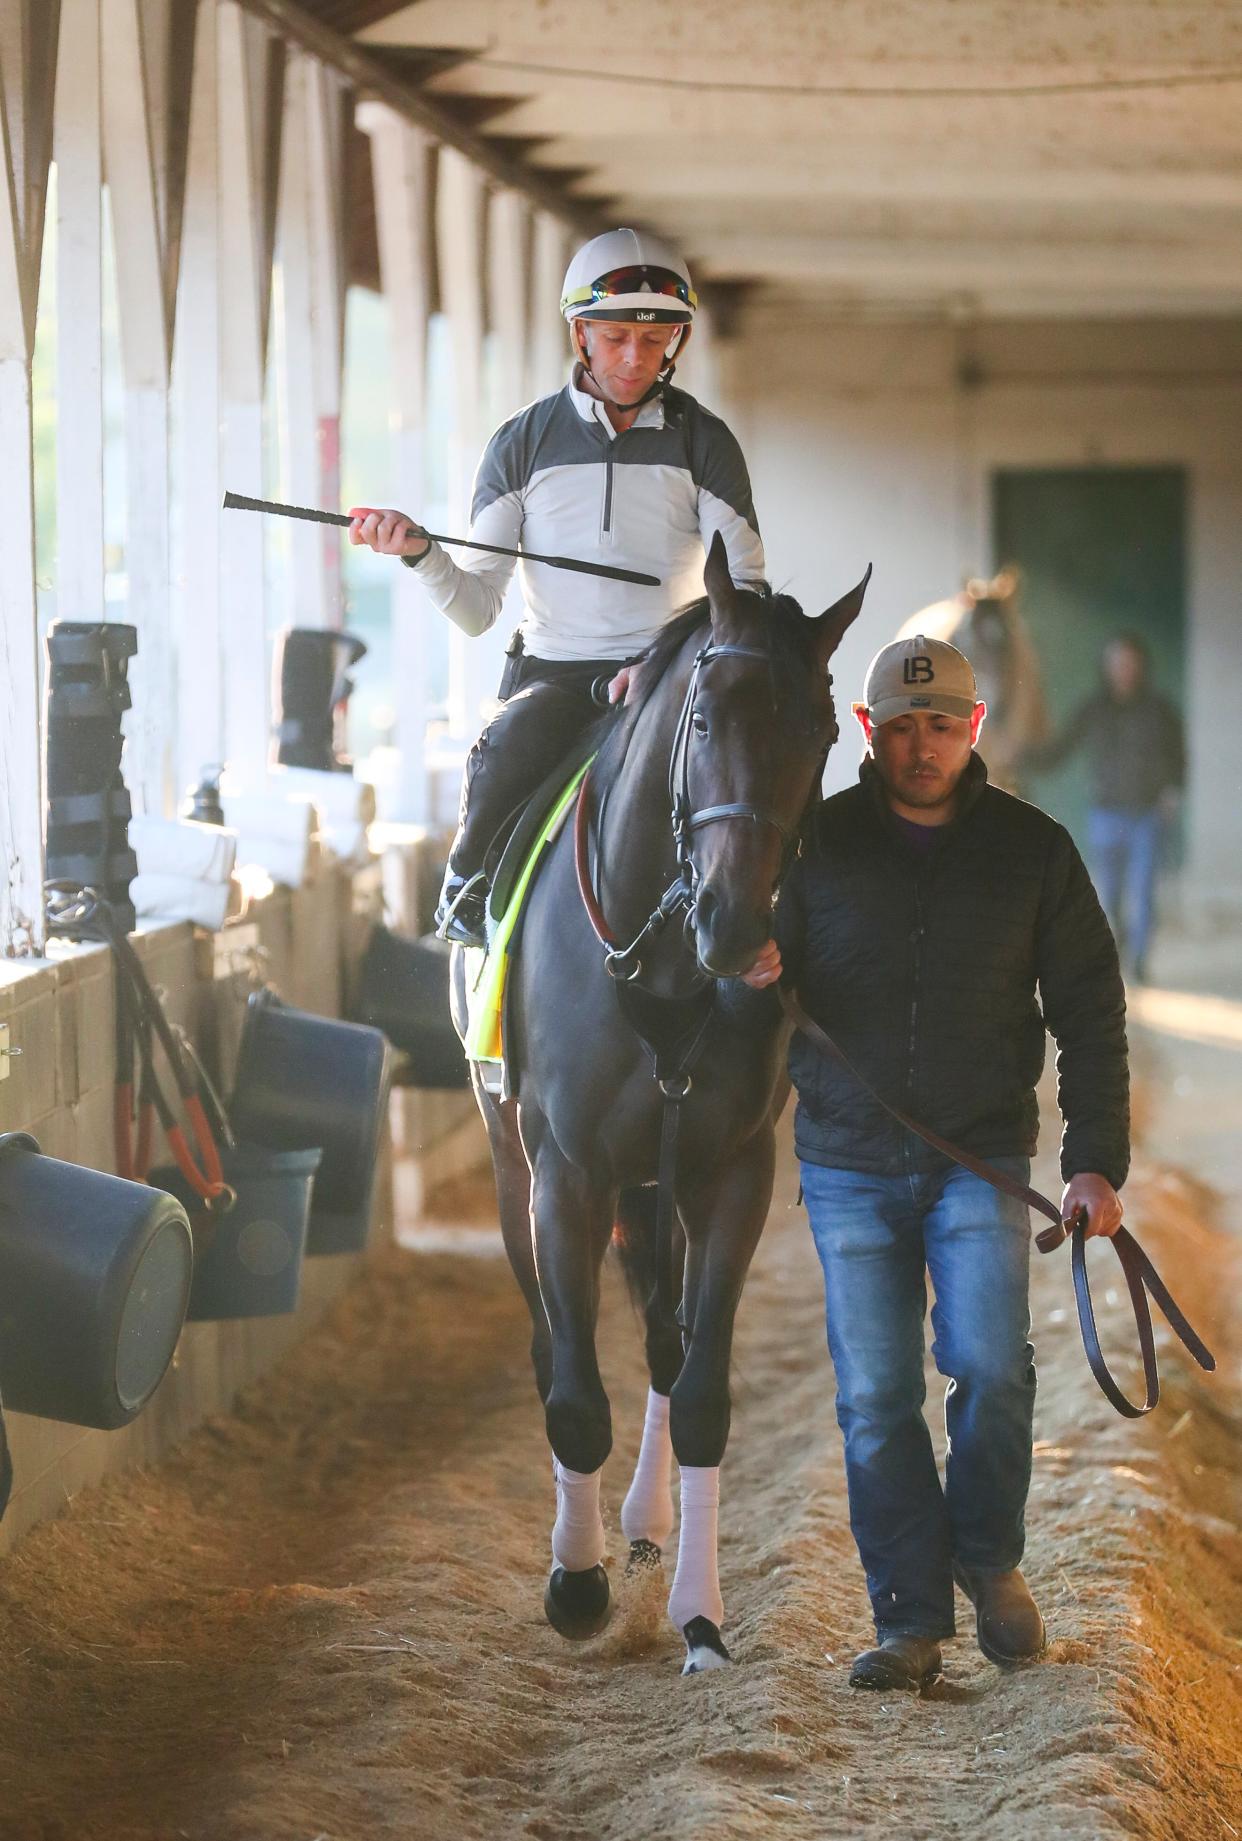 Kentucky Derby 150 contender Honor Marie is walked around the barn with jockey Ben Curtis during his first workout with the colt at Churchill Downs on April 25. Honor Marie has five owners: Ribble Farms, Michael Eiserman, Earl Silver, Kenneth Fishbein and Dave Fishbein.